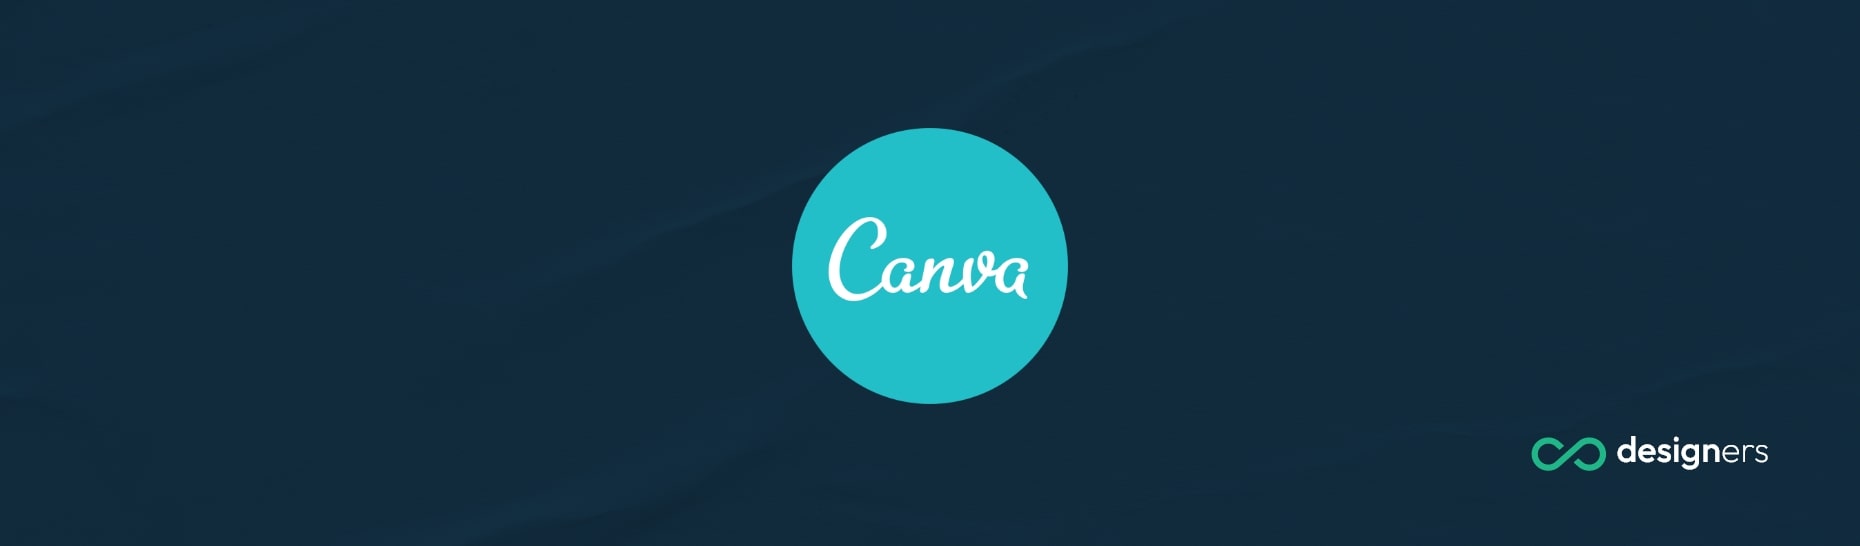 Does Canva Have a Virus?